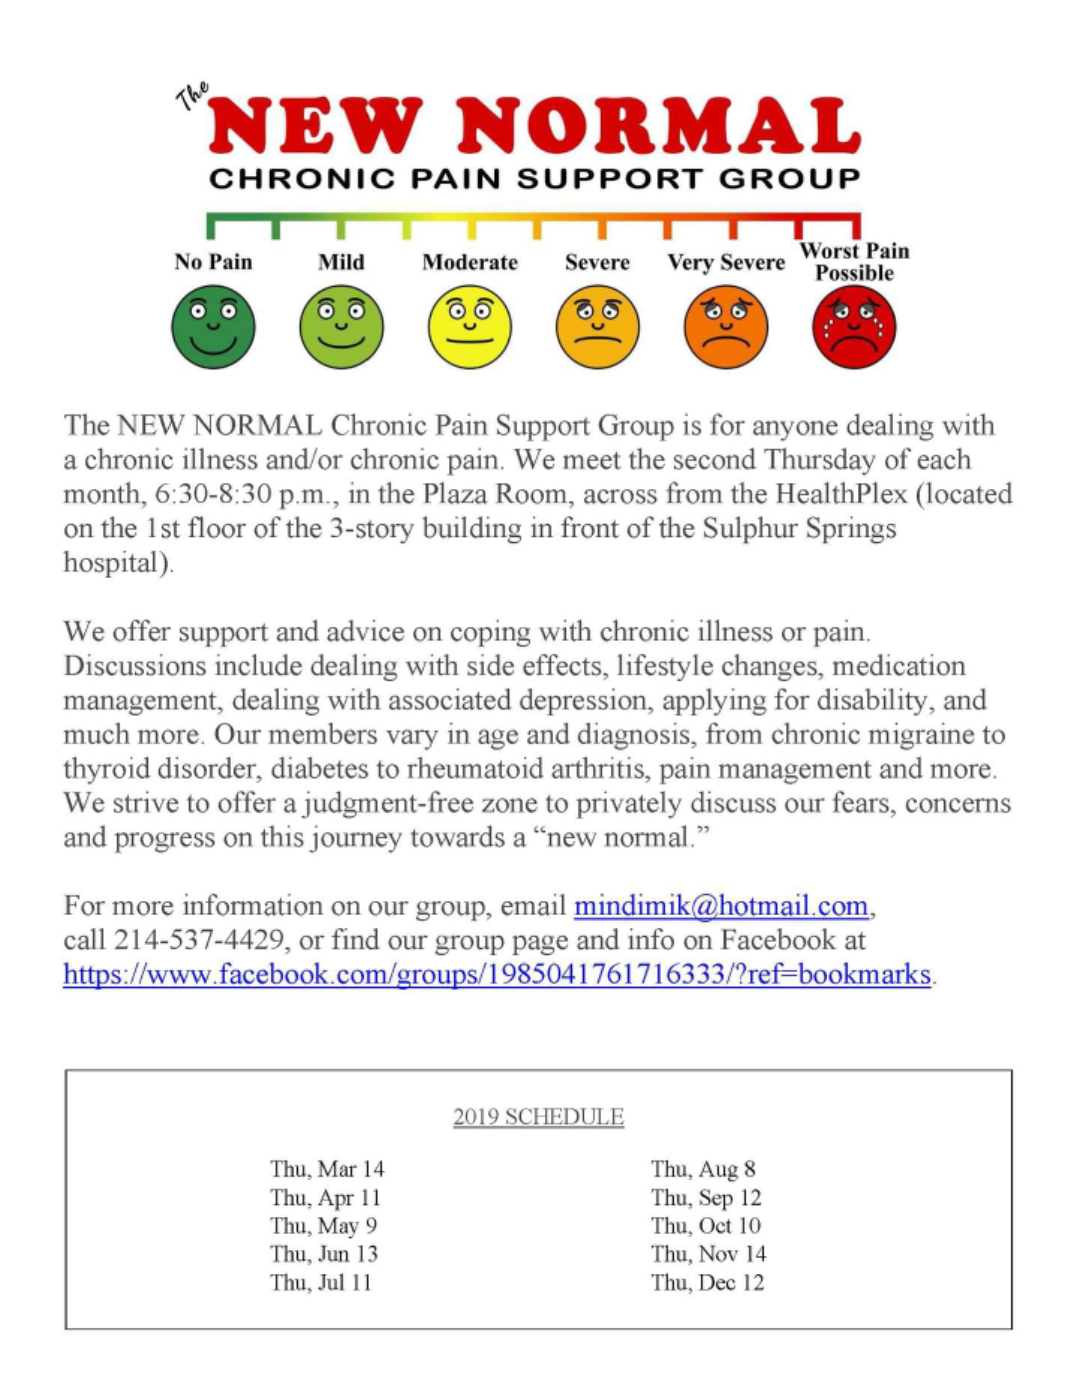 Chronic Pain Support Group Hosting Monthly Meeting at Hospital Plaza